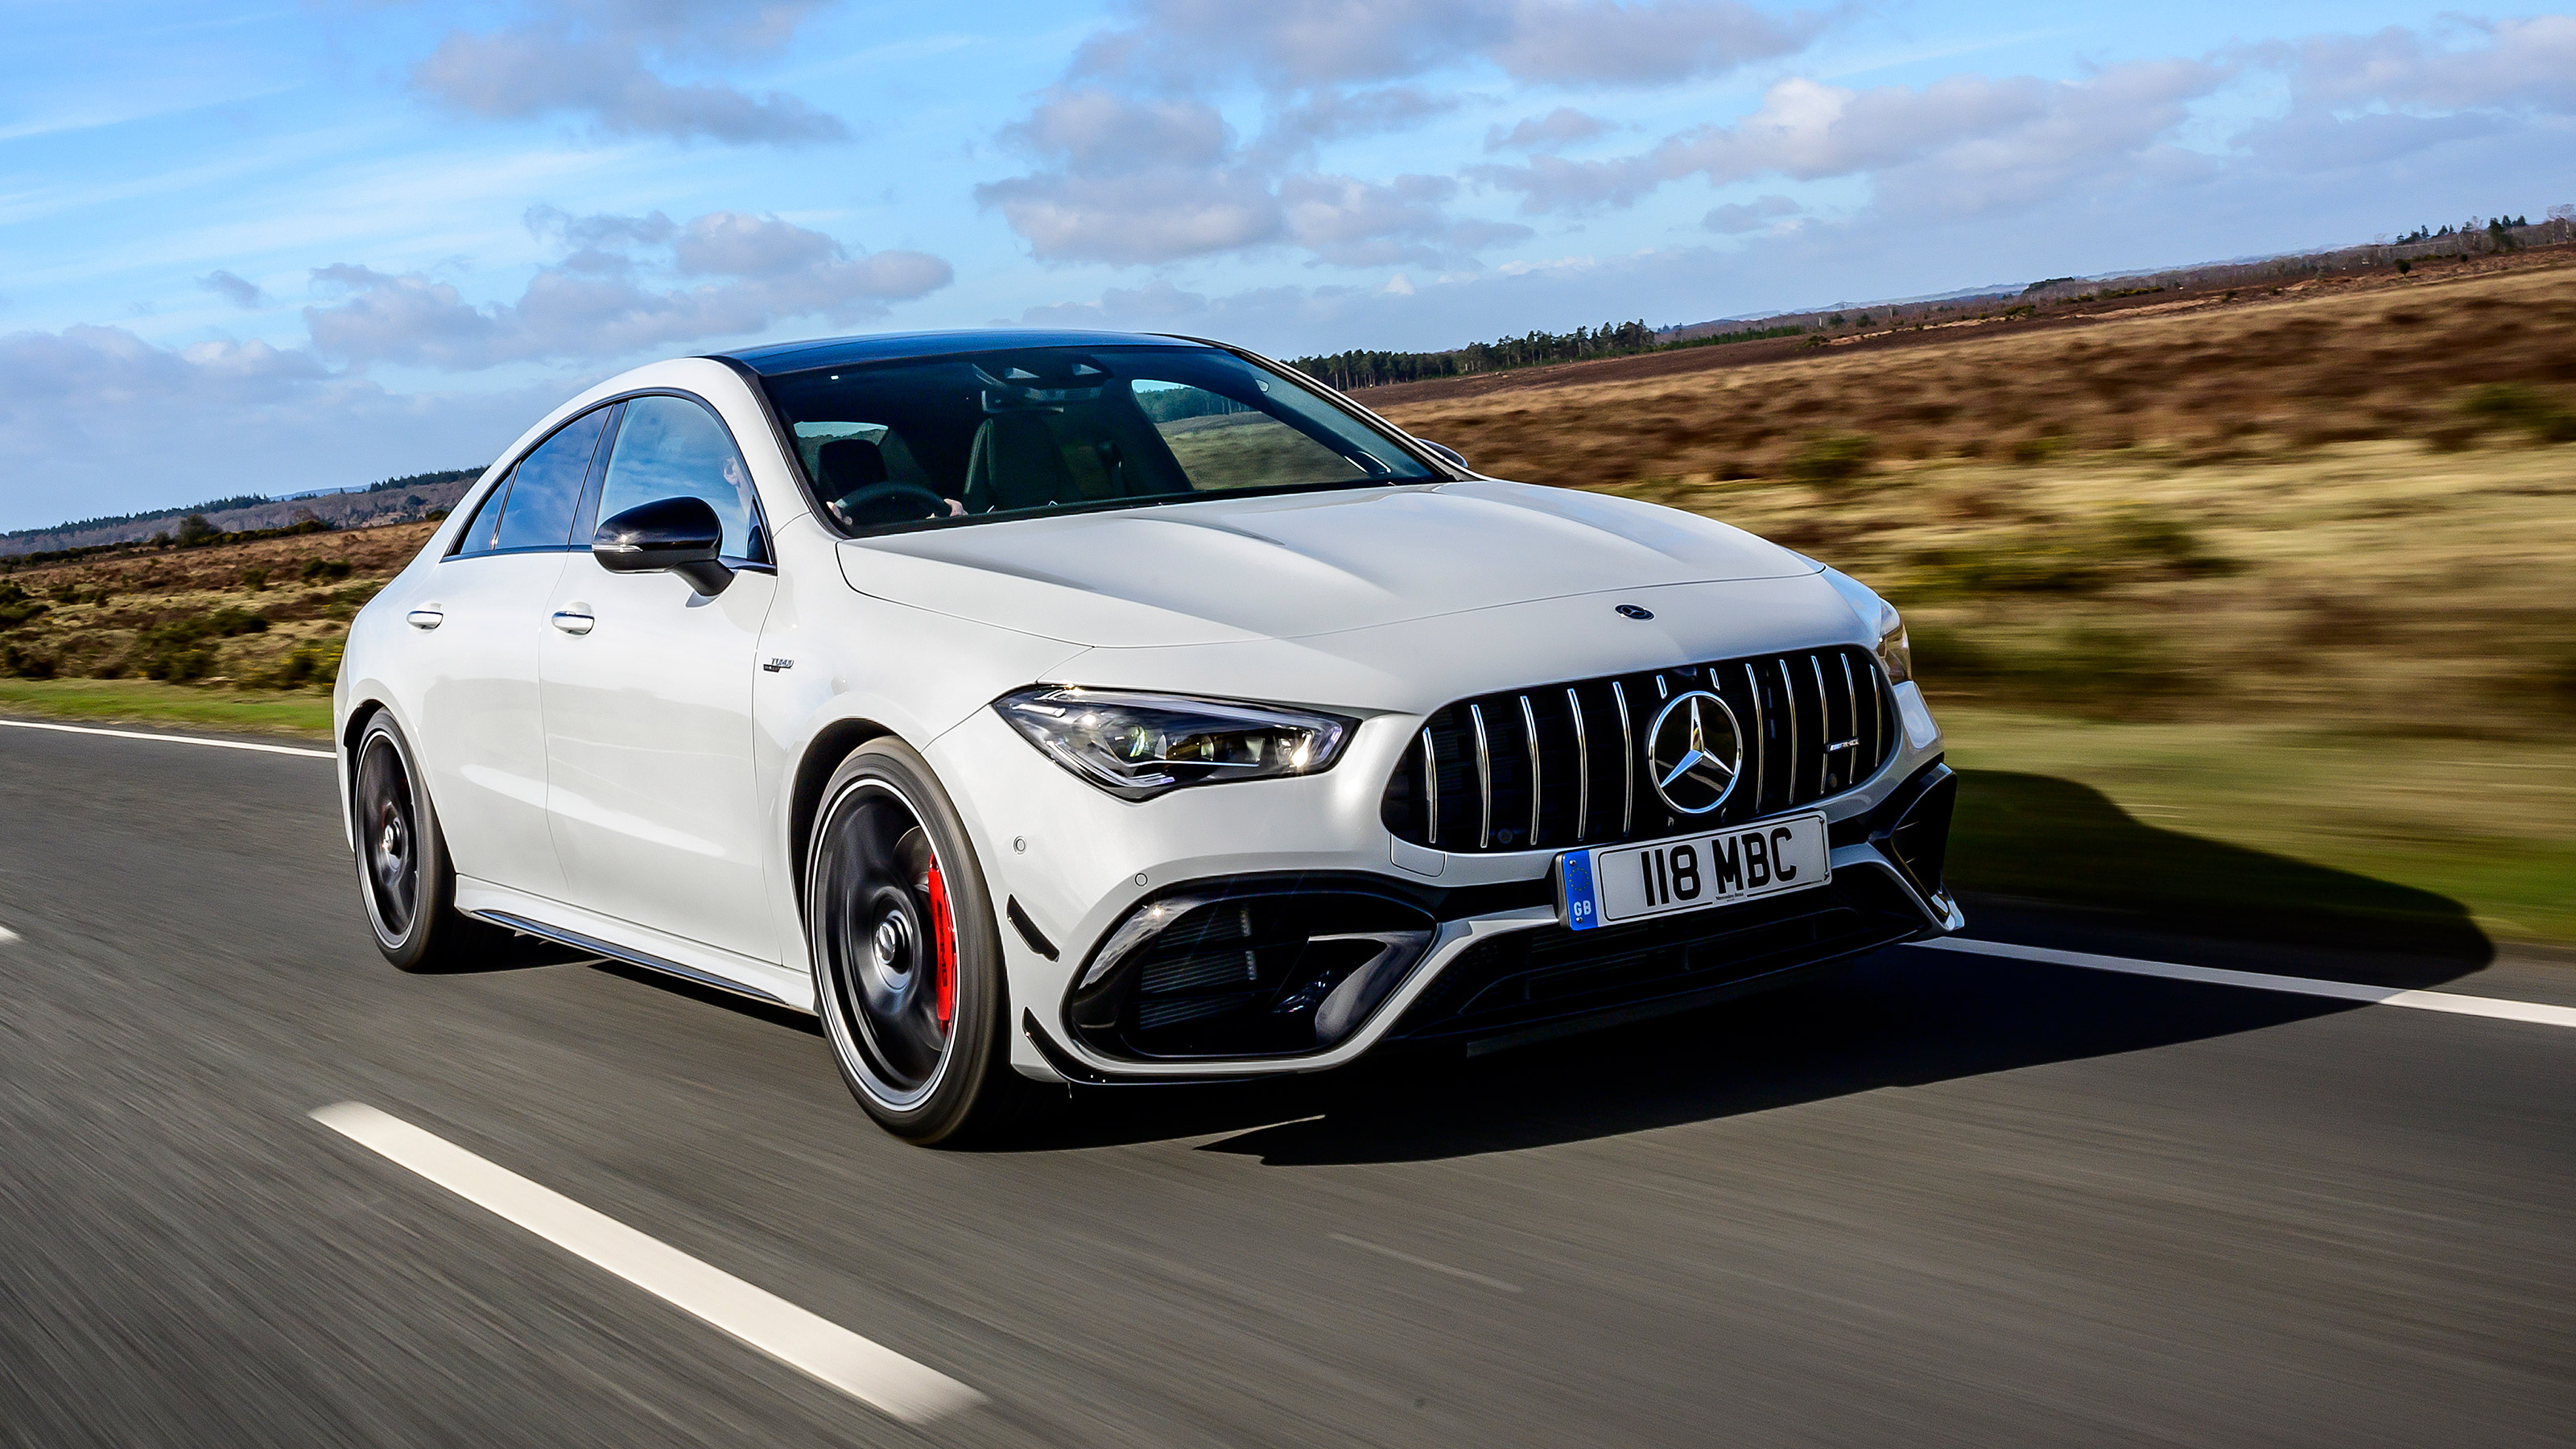 Cla 45 S Amg 0 100 Mercedes CLA45 AMG review - price, specs and 0-60 times | evo